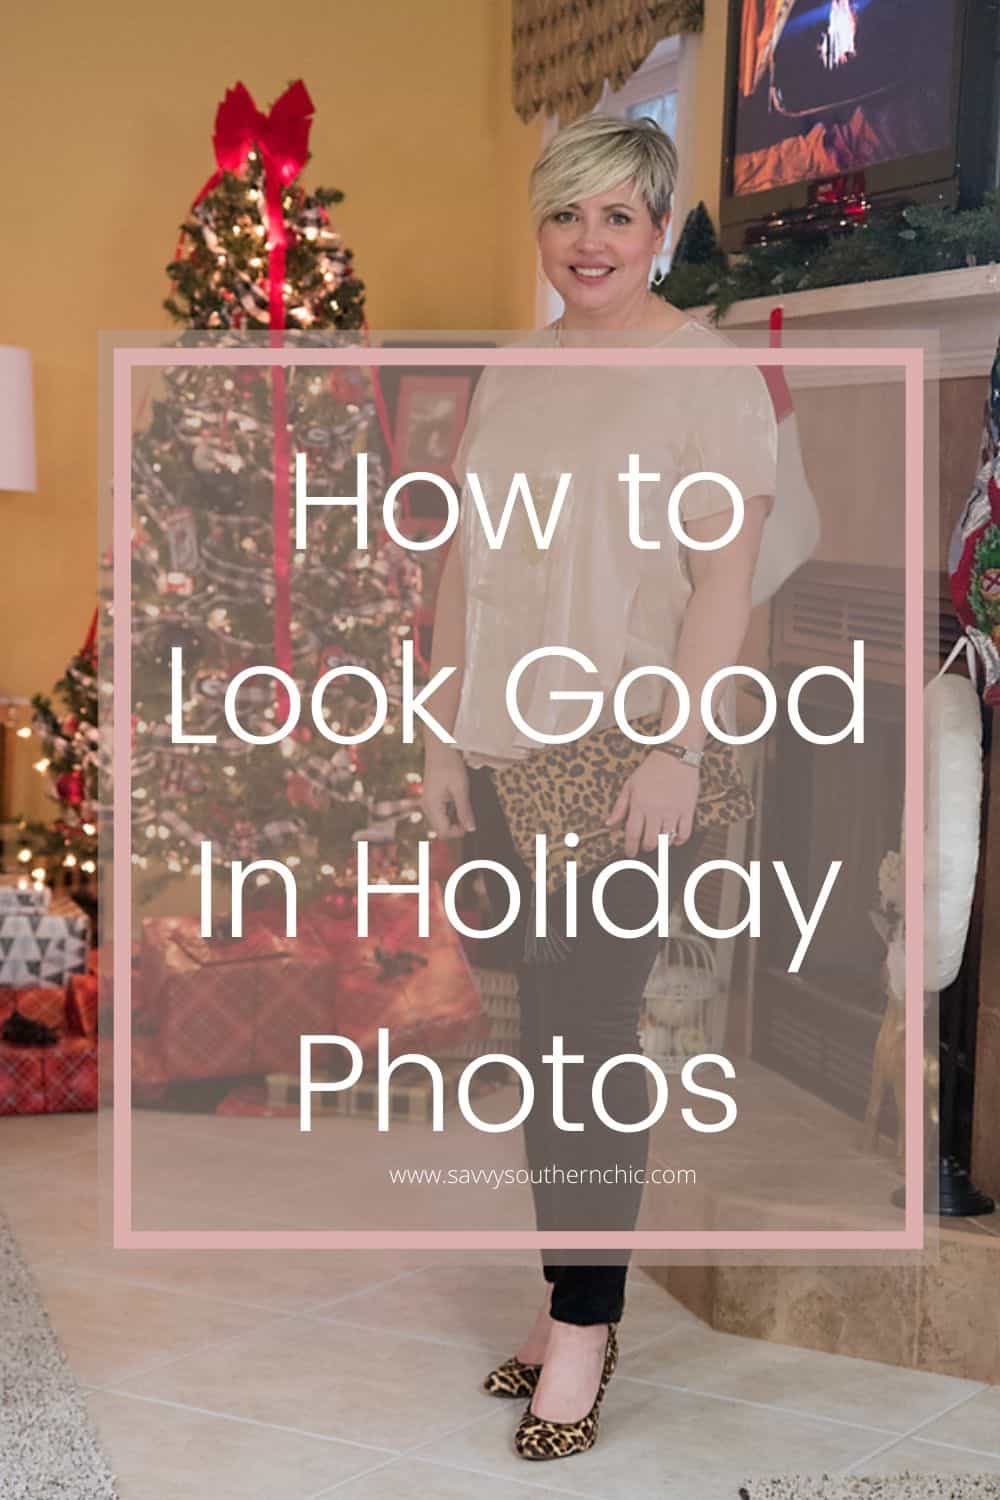 5 Ways to Look Good in Holiday Photos